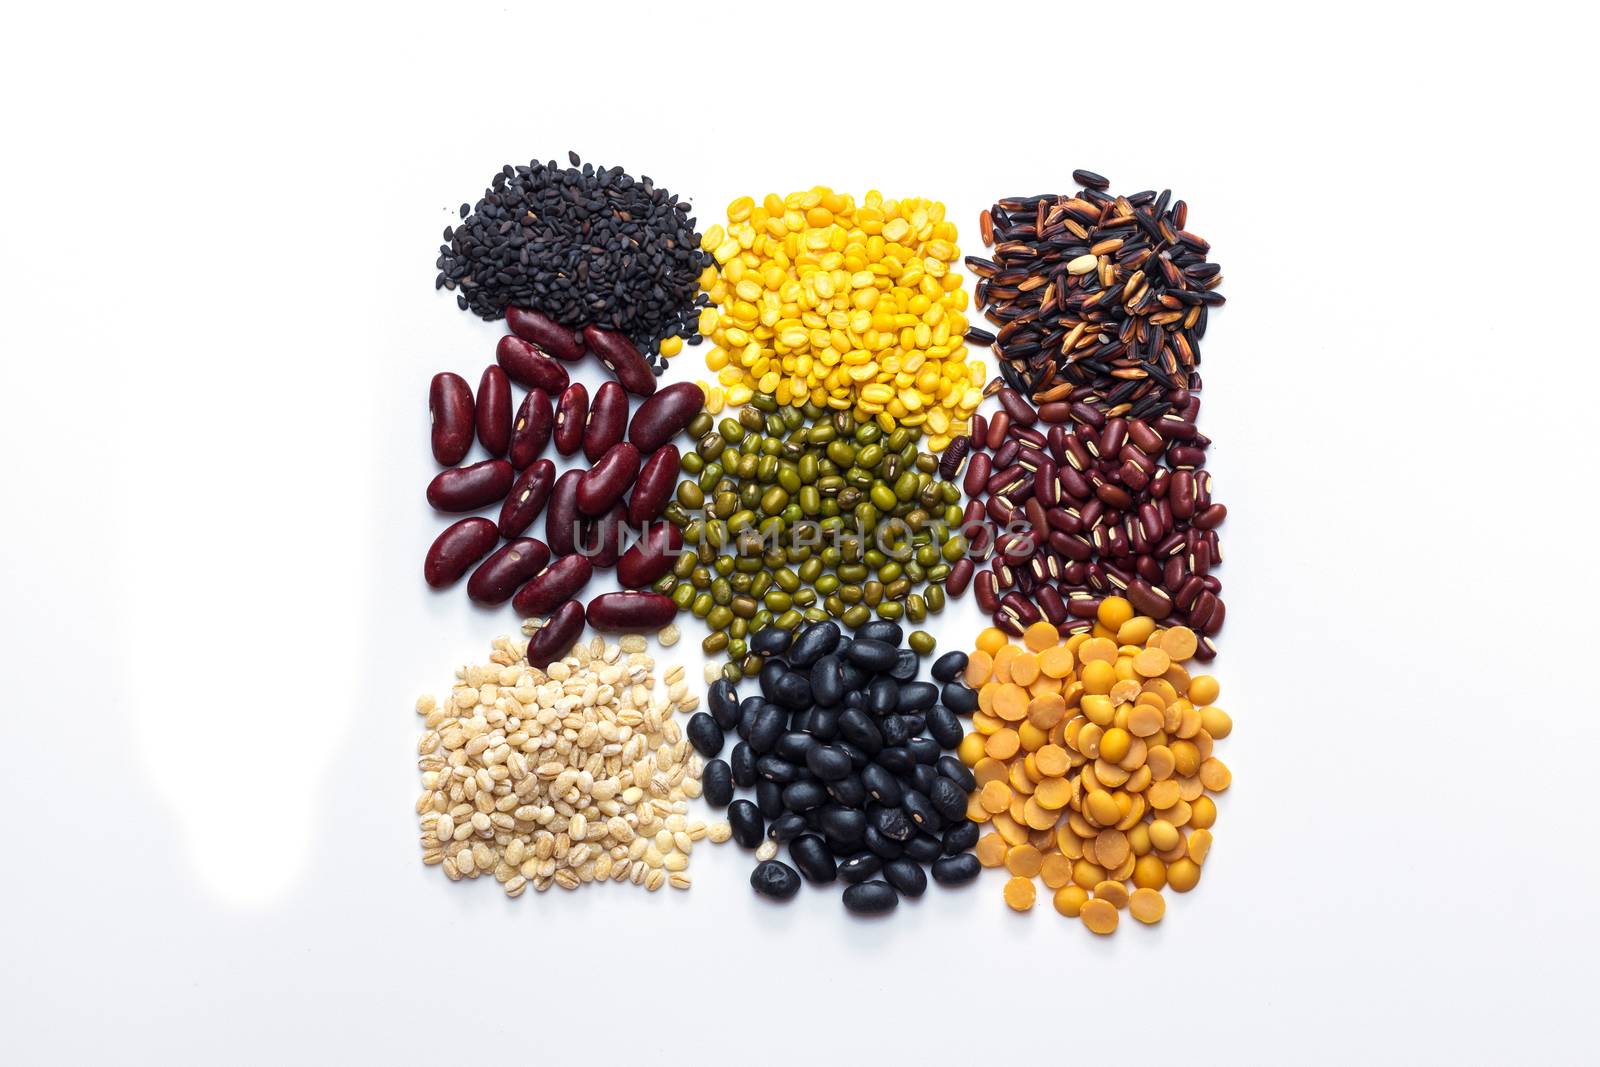 grains seeds and beans in different types and colors on white background